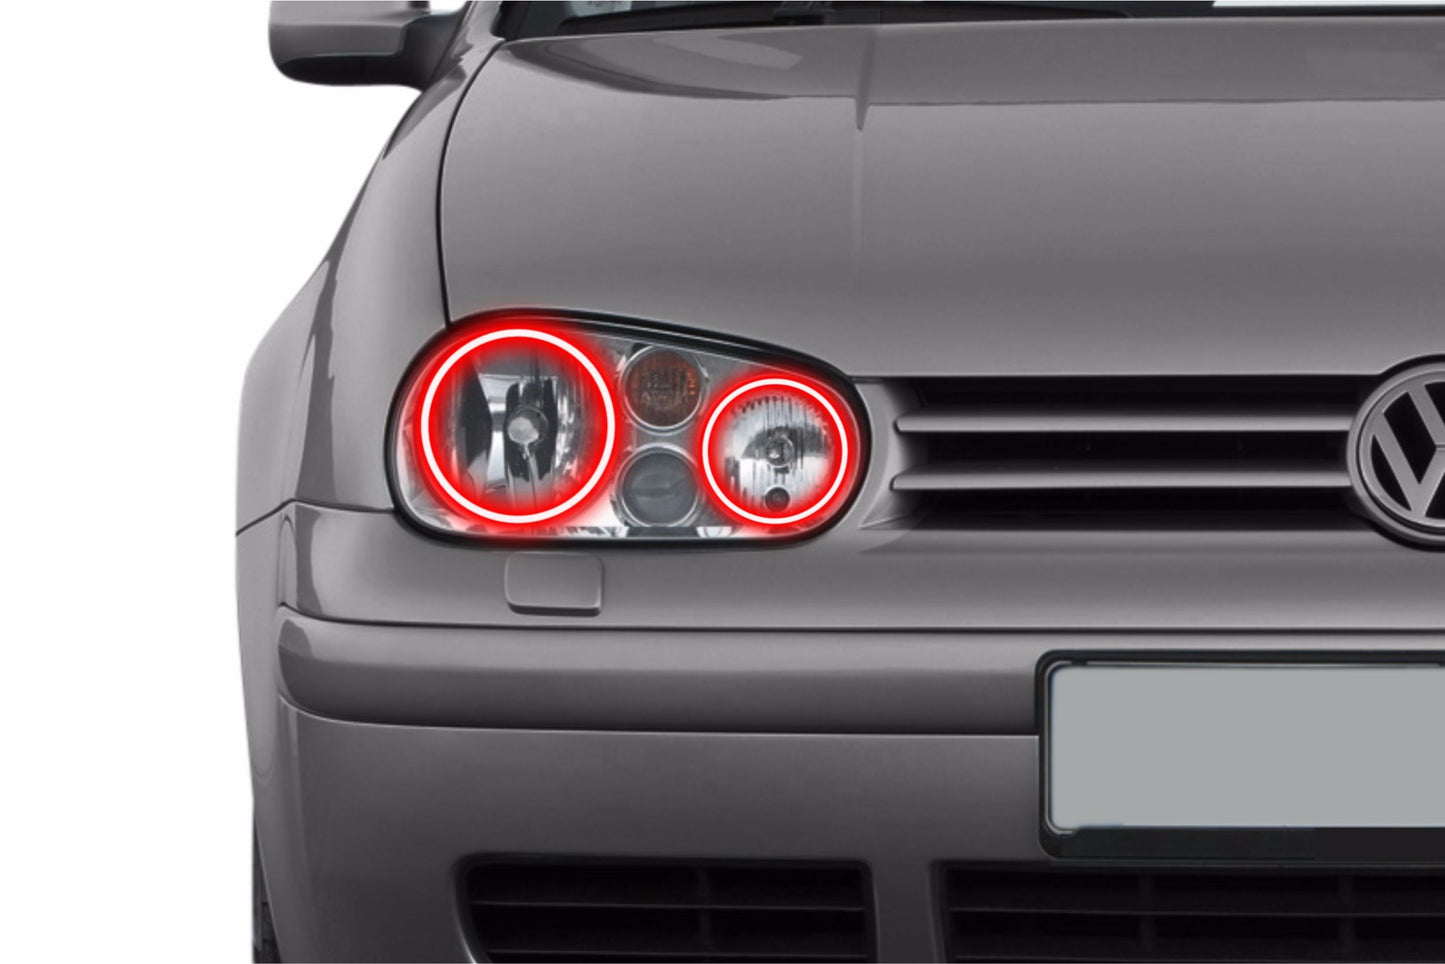 Volkswagen Golf (99-06): Profile Prism Fitted Halos (Kit)